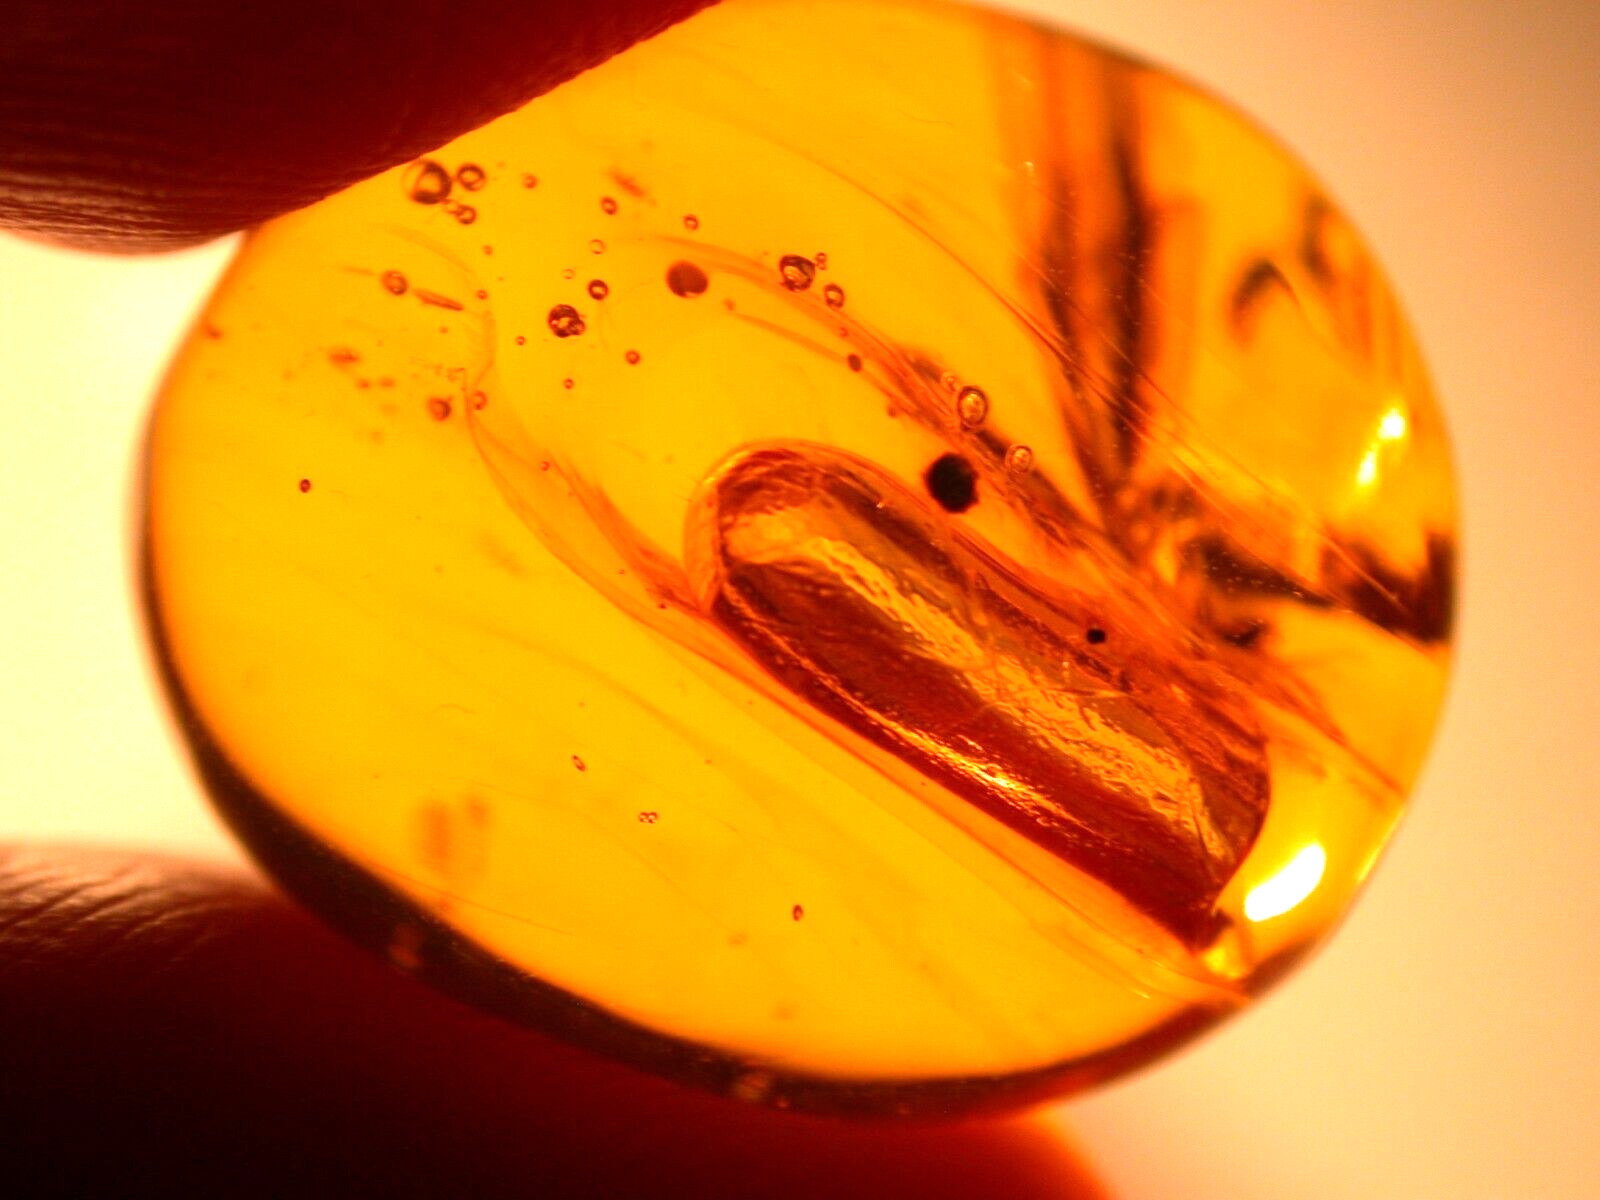 GIANT Air Bubble with Winged Termite in Dominican Amber Fossil Gem